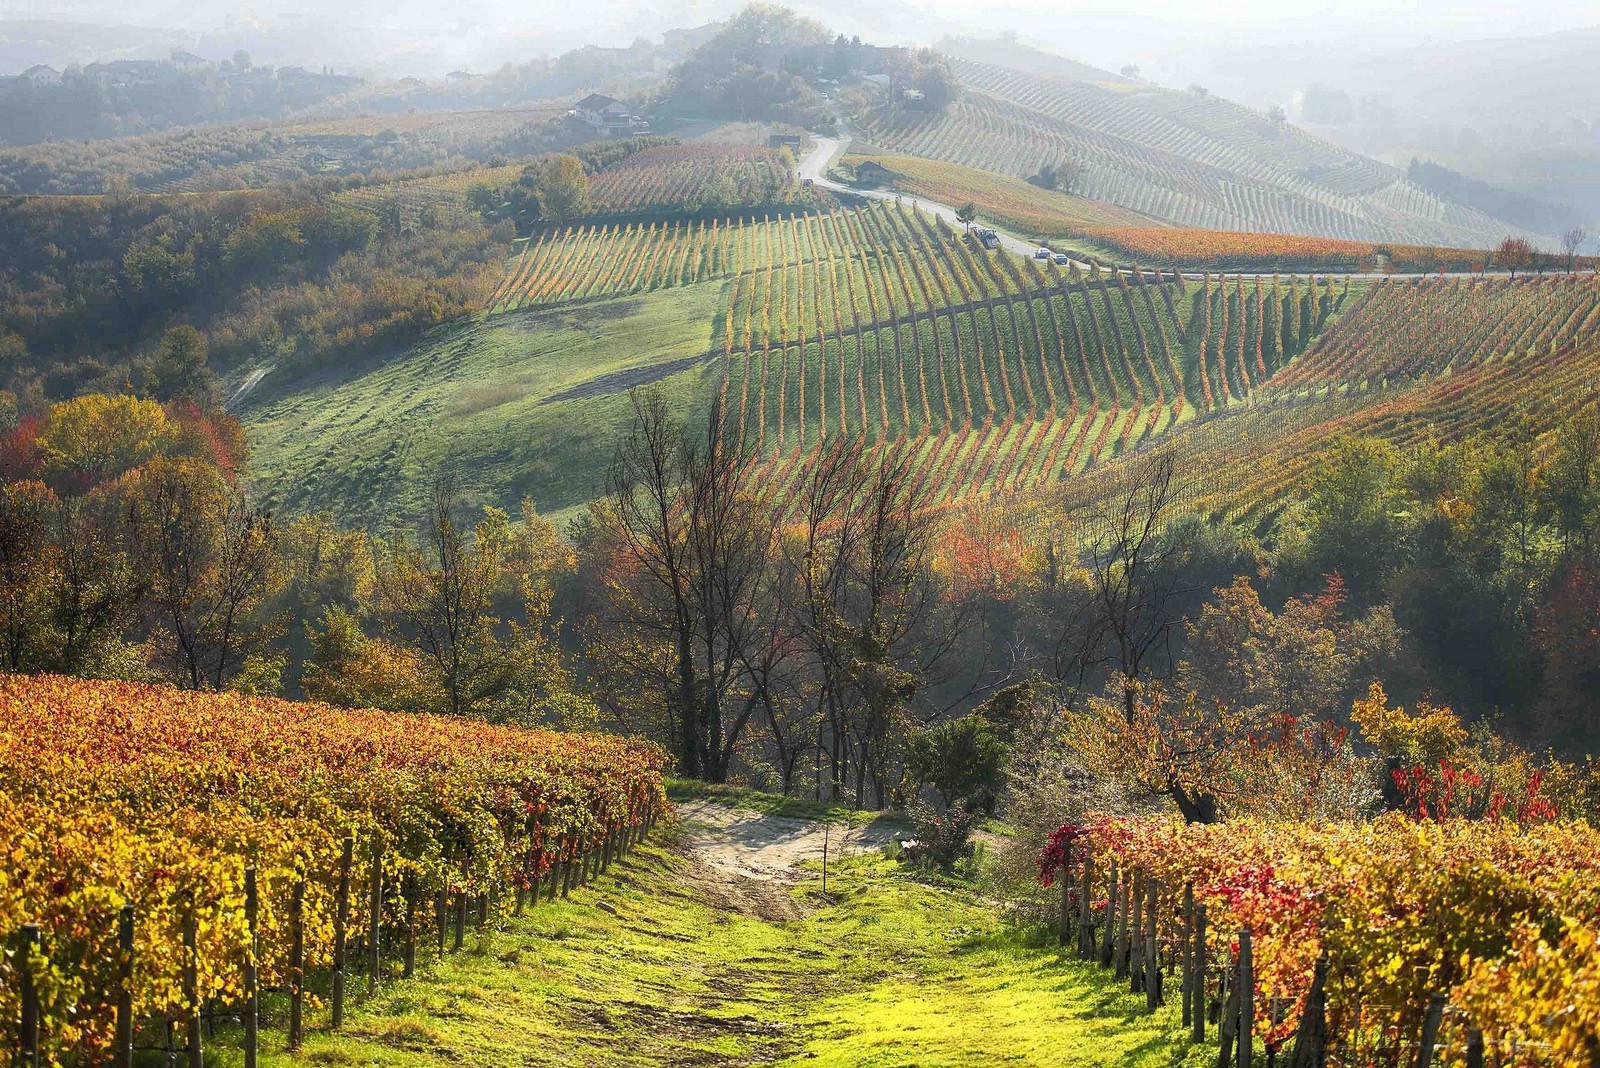 photography, Nature, Landscape, Vineyard, Field, Trees, Hills, Mist, Fall, Italy Wallpaper